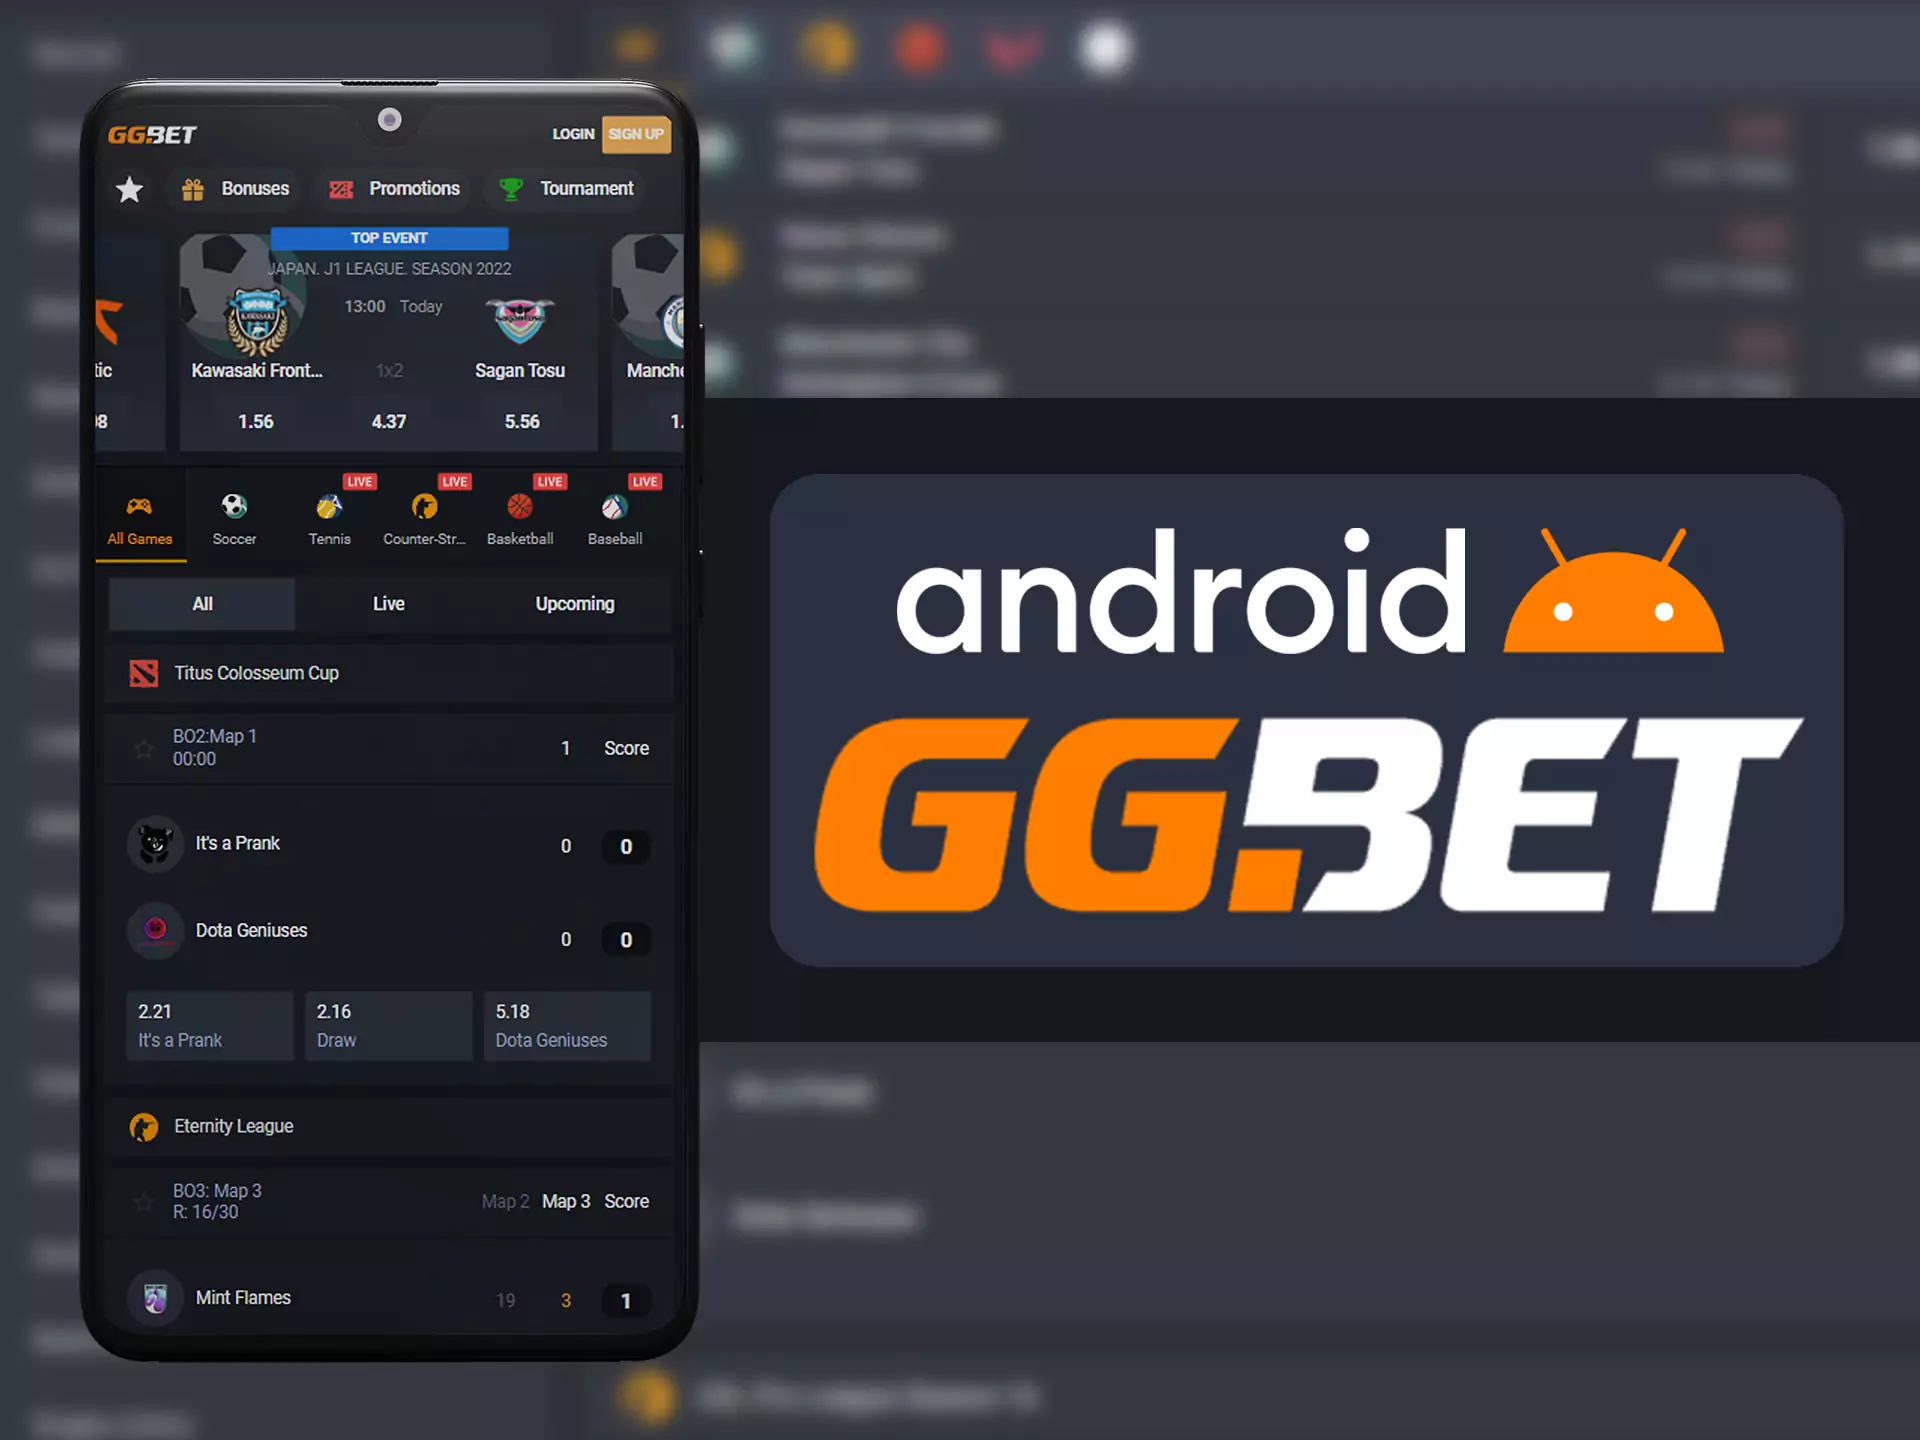 Download the apk file from official GGBet website.